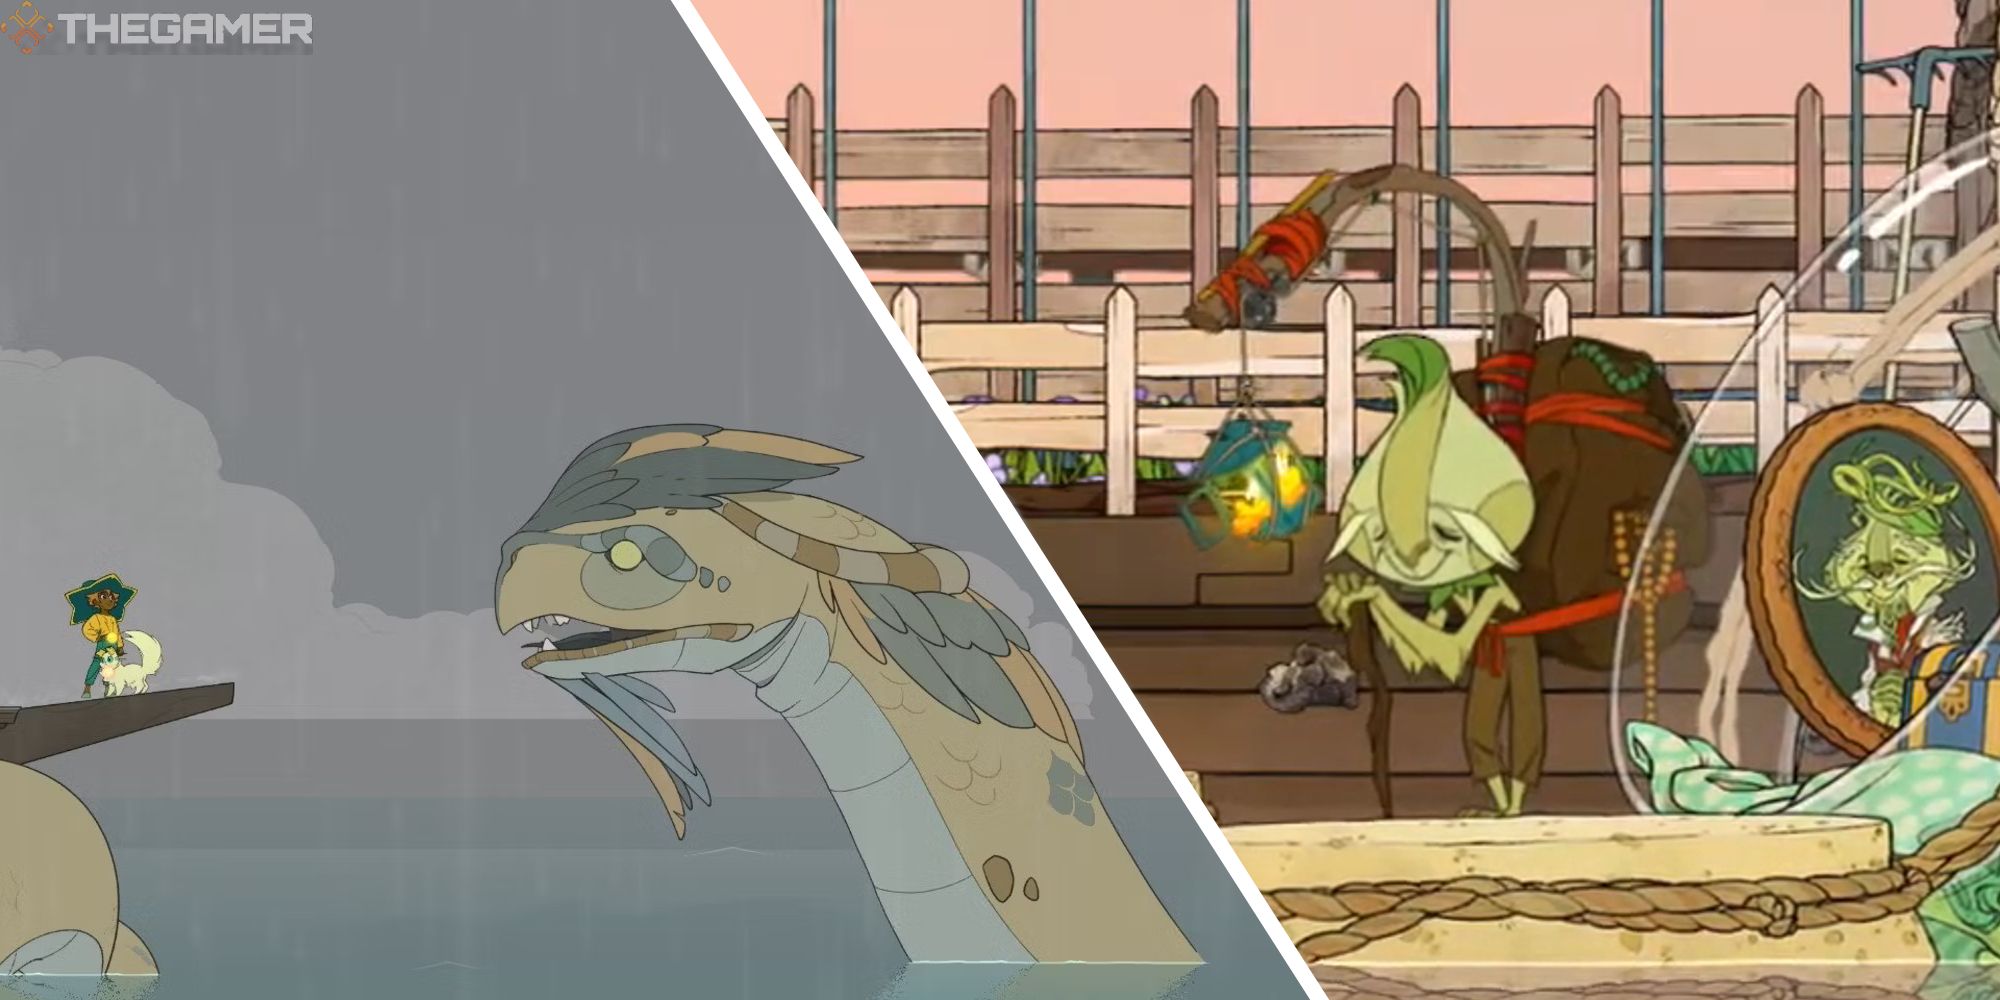 split image showing stella at a sea dragon next to image of francis the trader